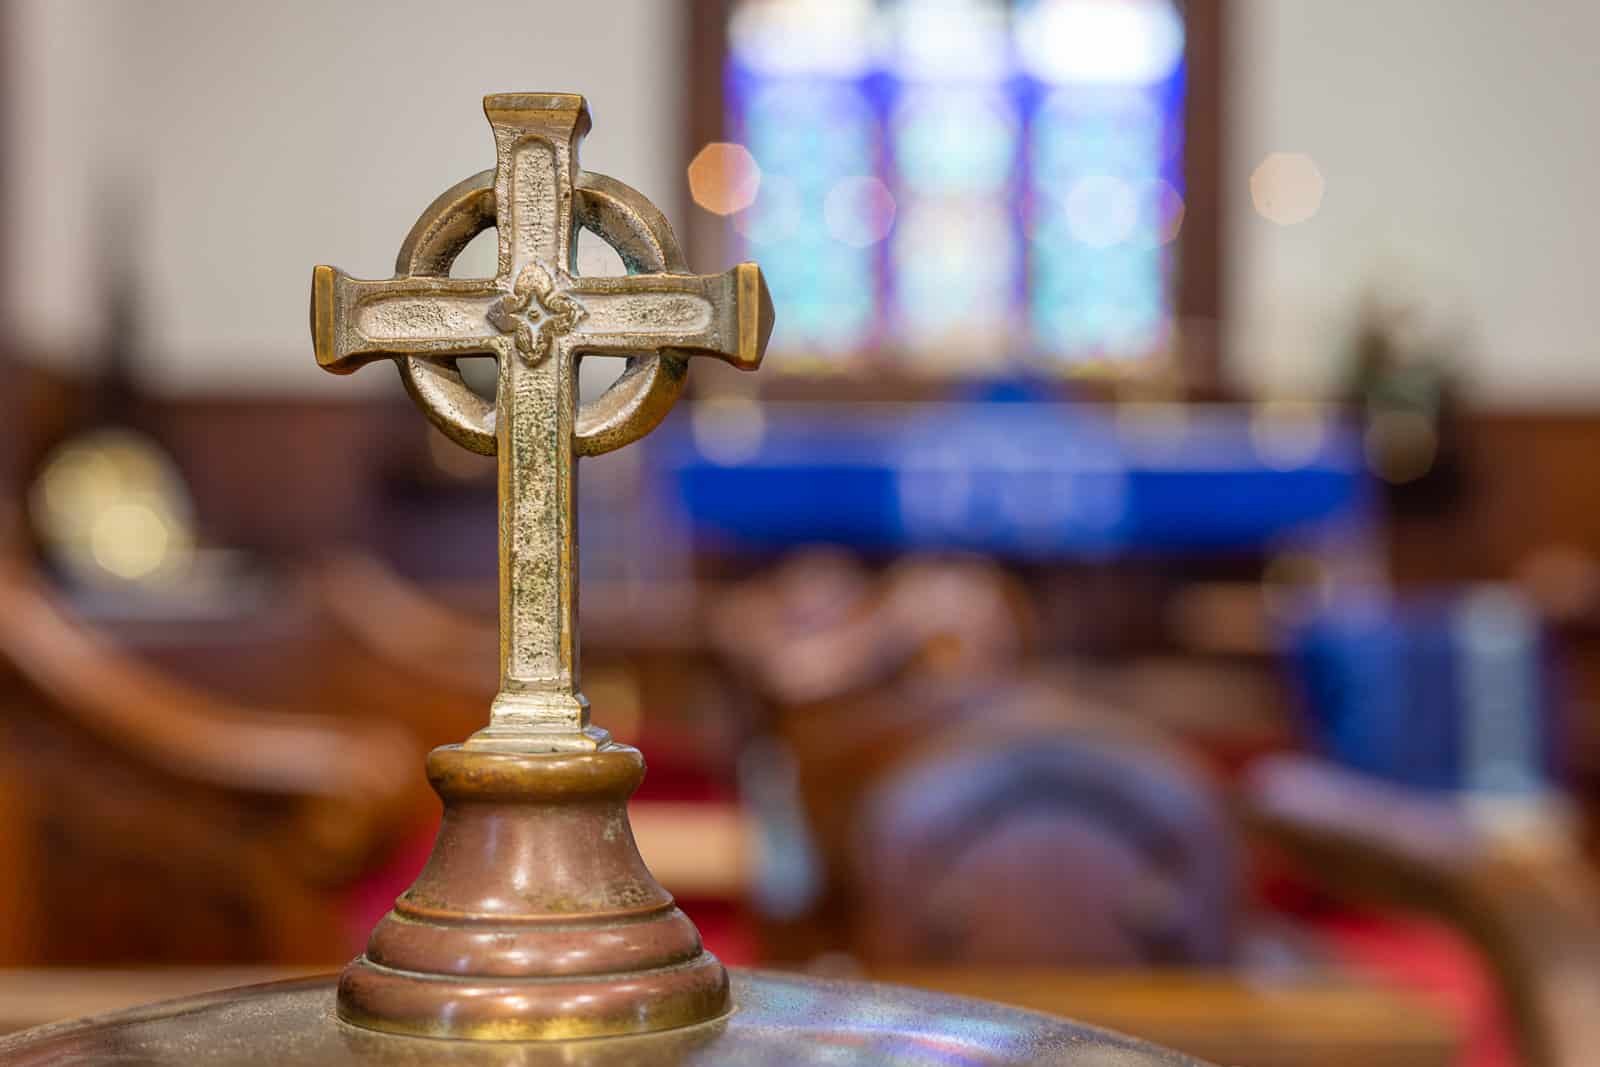 A close-up photo of a metal cross decoration that serves as the handle for an antique baptismal font at St. Luke's Episcopal Church in Cleveland, TN